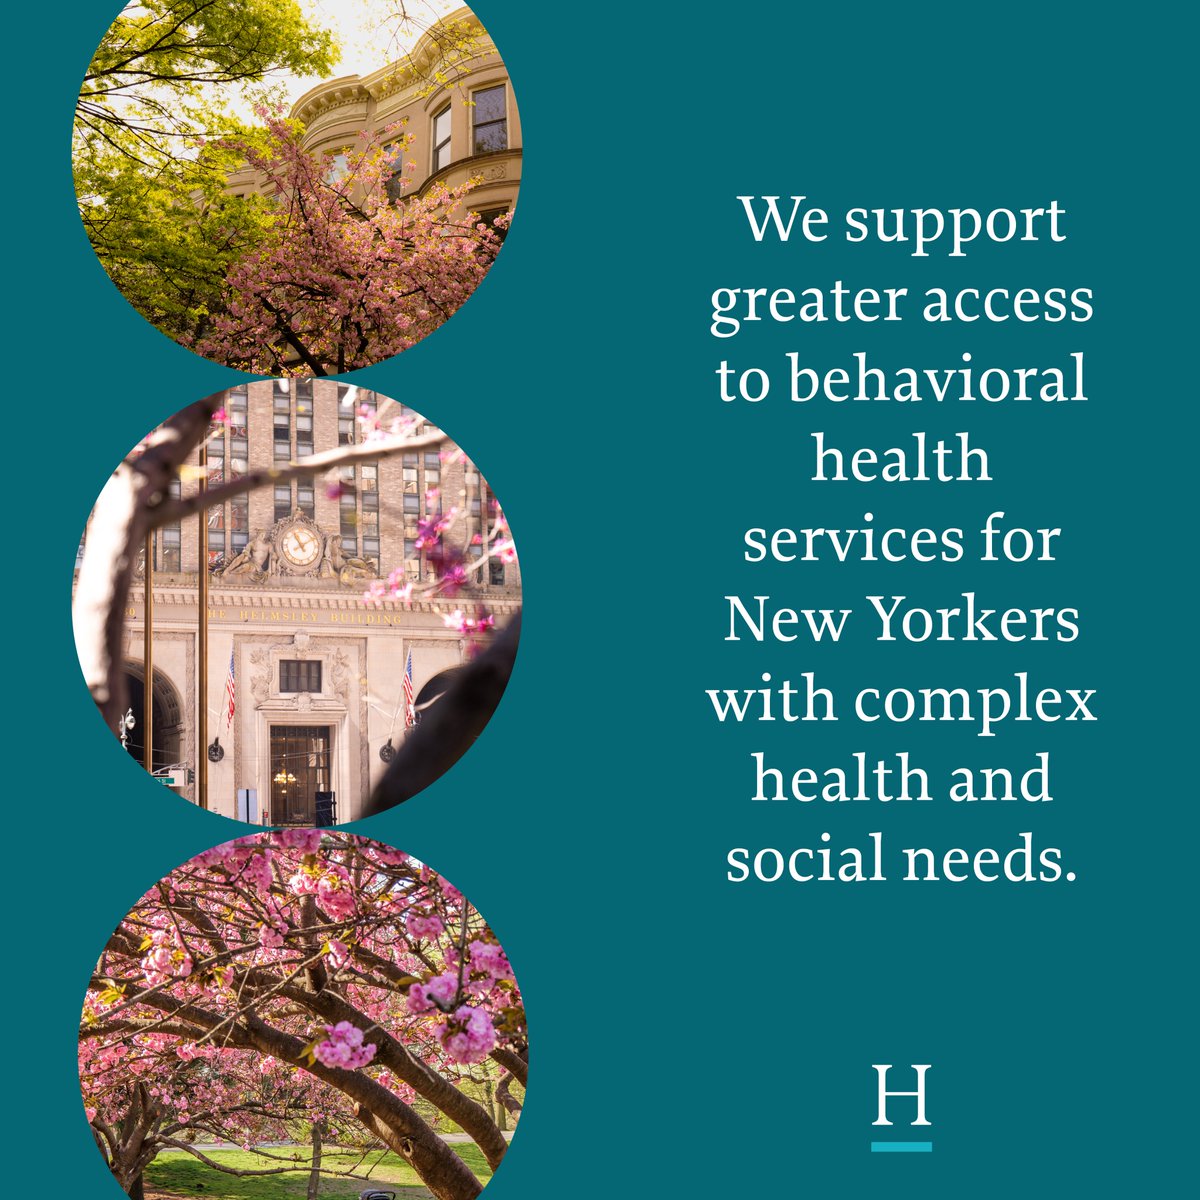 “For New Yorkers who have some of the most complex health and social needs, a range of personalized care options is needed to achieve long-term stability,” said Tracy Perrizo, New York City Program Officer. Helmsley is working with organizations across the city’s healthcare…